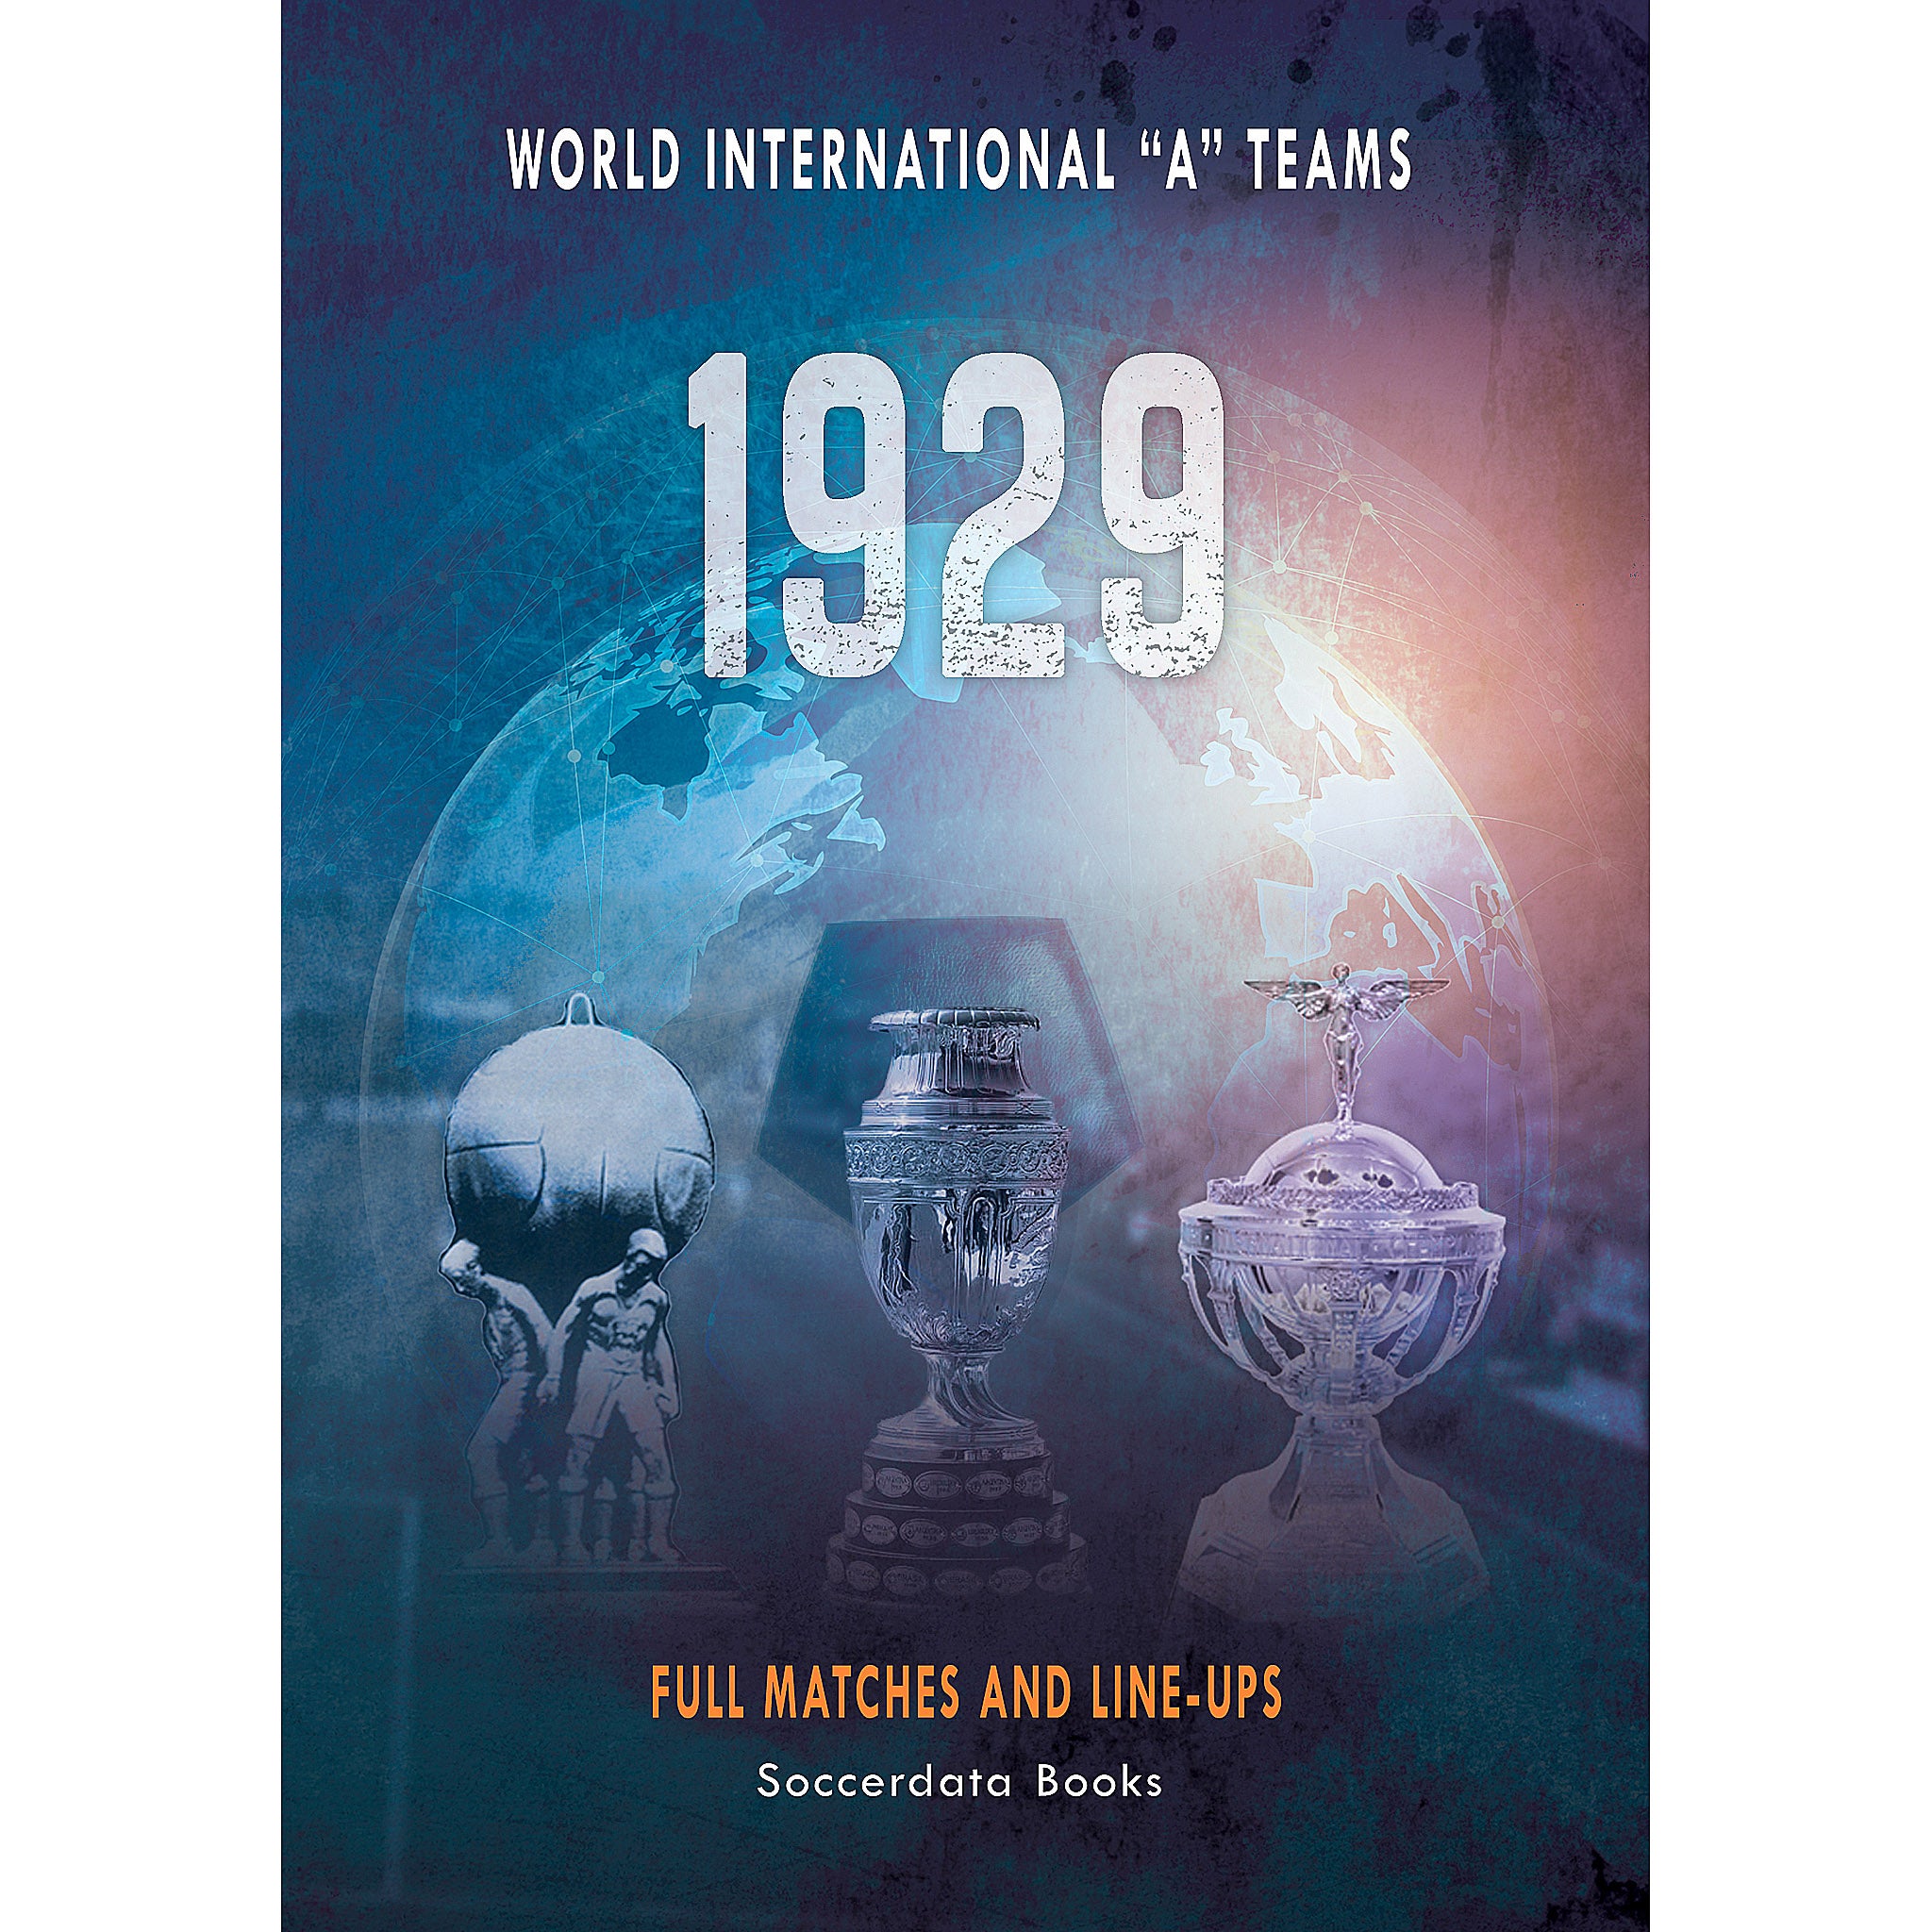 World International "A" Teams 1929 – Full Matches and Line-ups